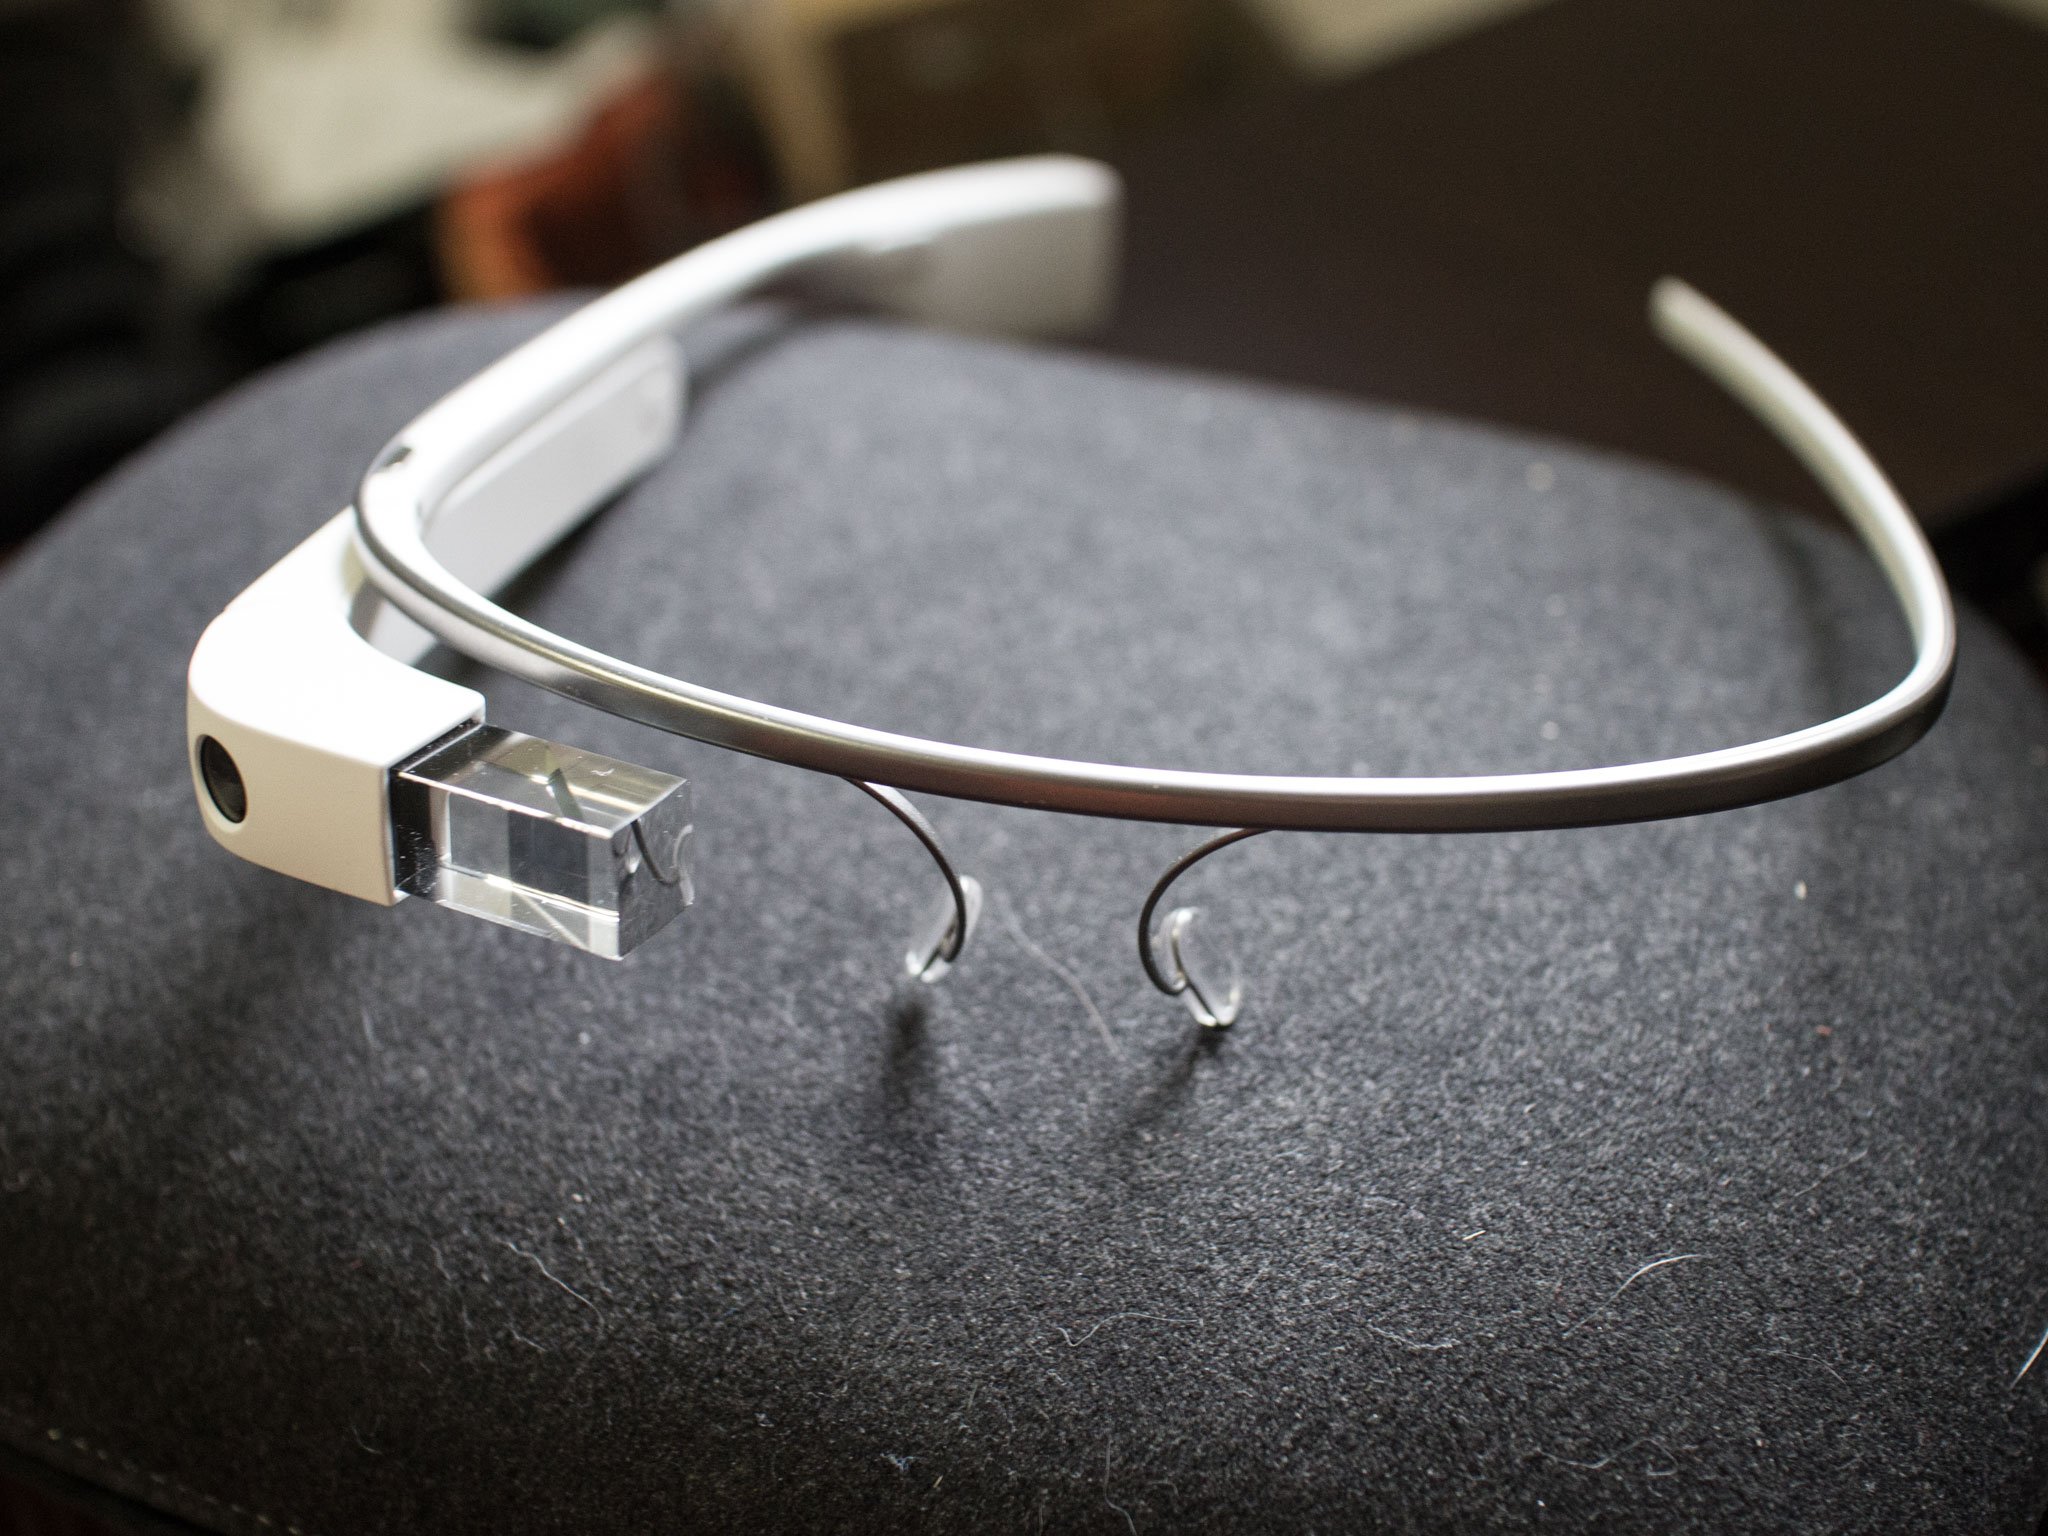 You can now buy the new-and-improved Google Glass 2 thumbnail